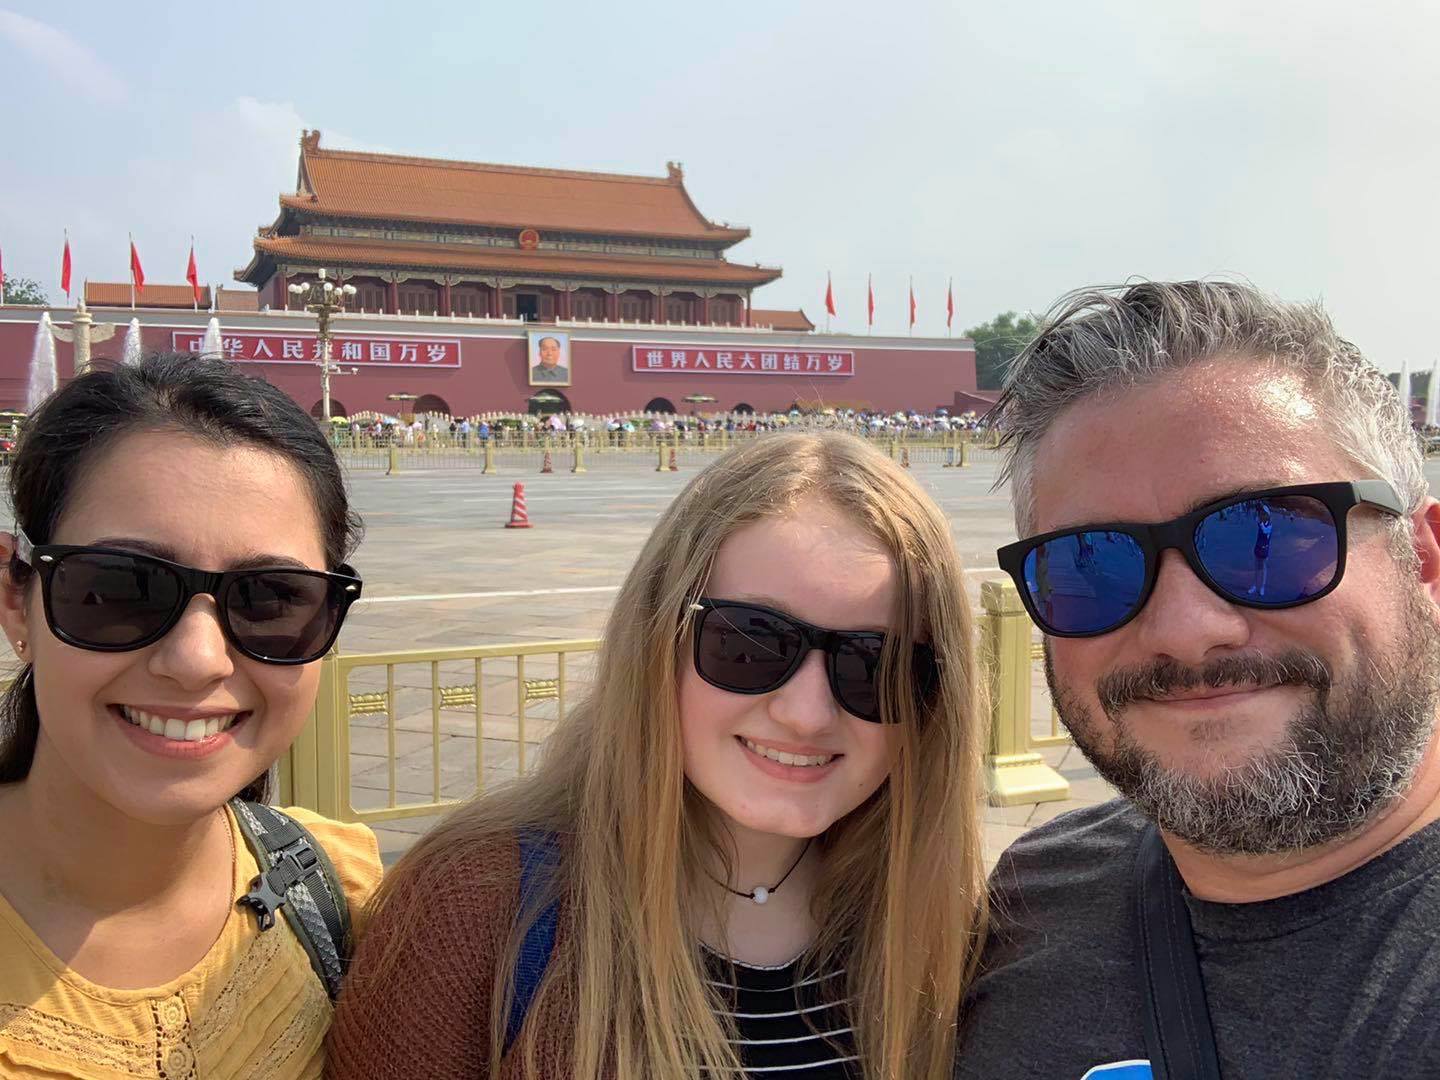 Day 2: Tiananmen Square, Forbidden City & The Great Wall / China